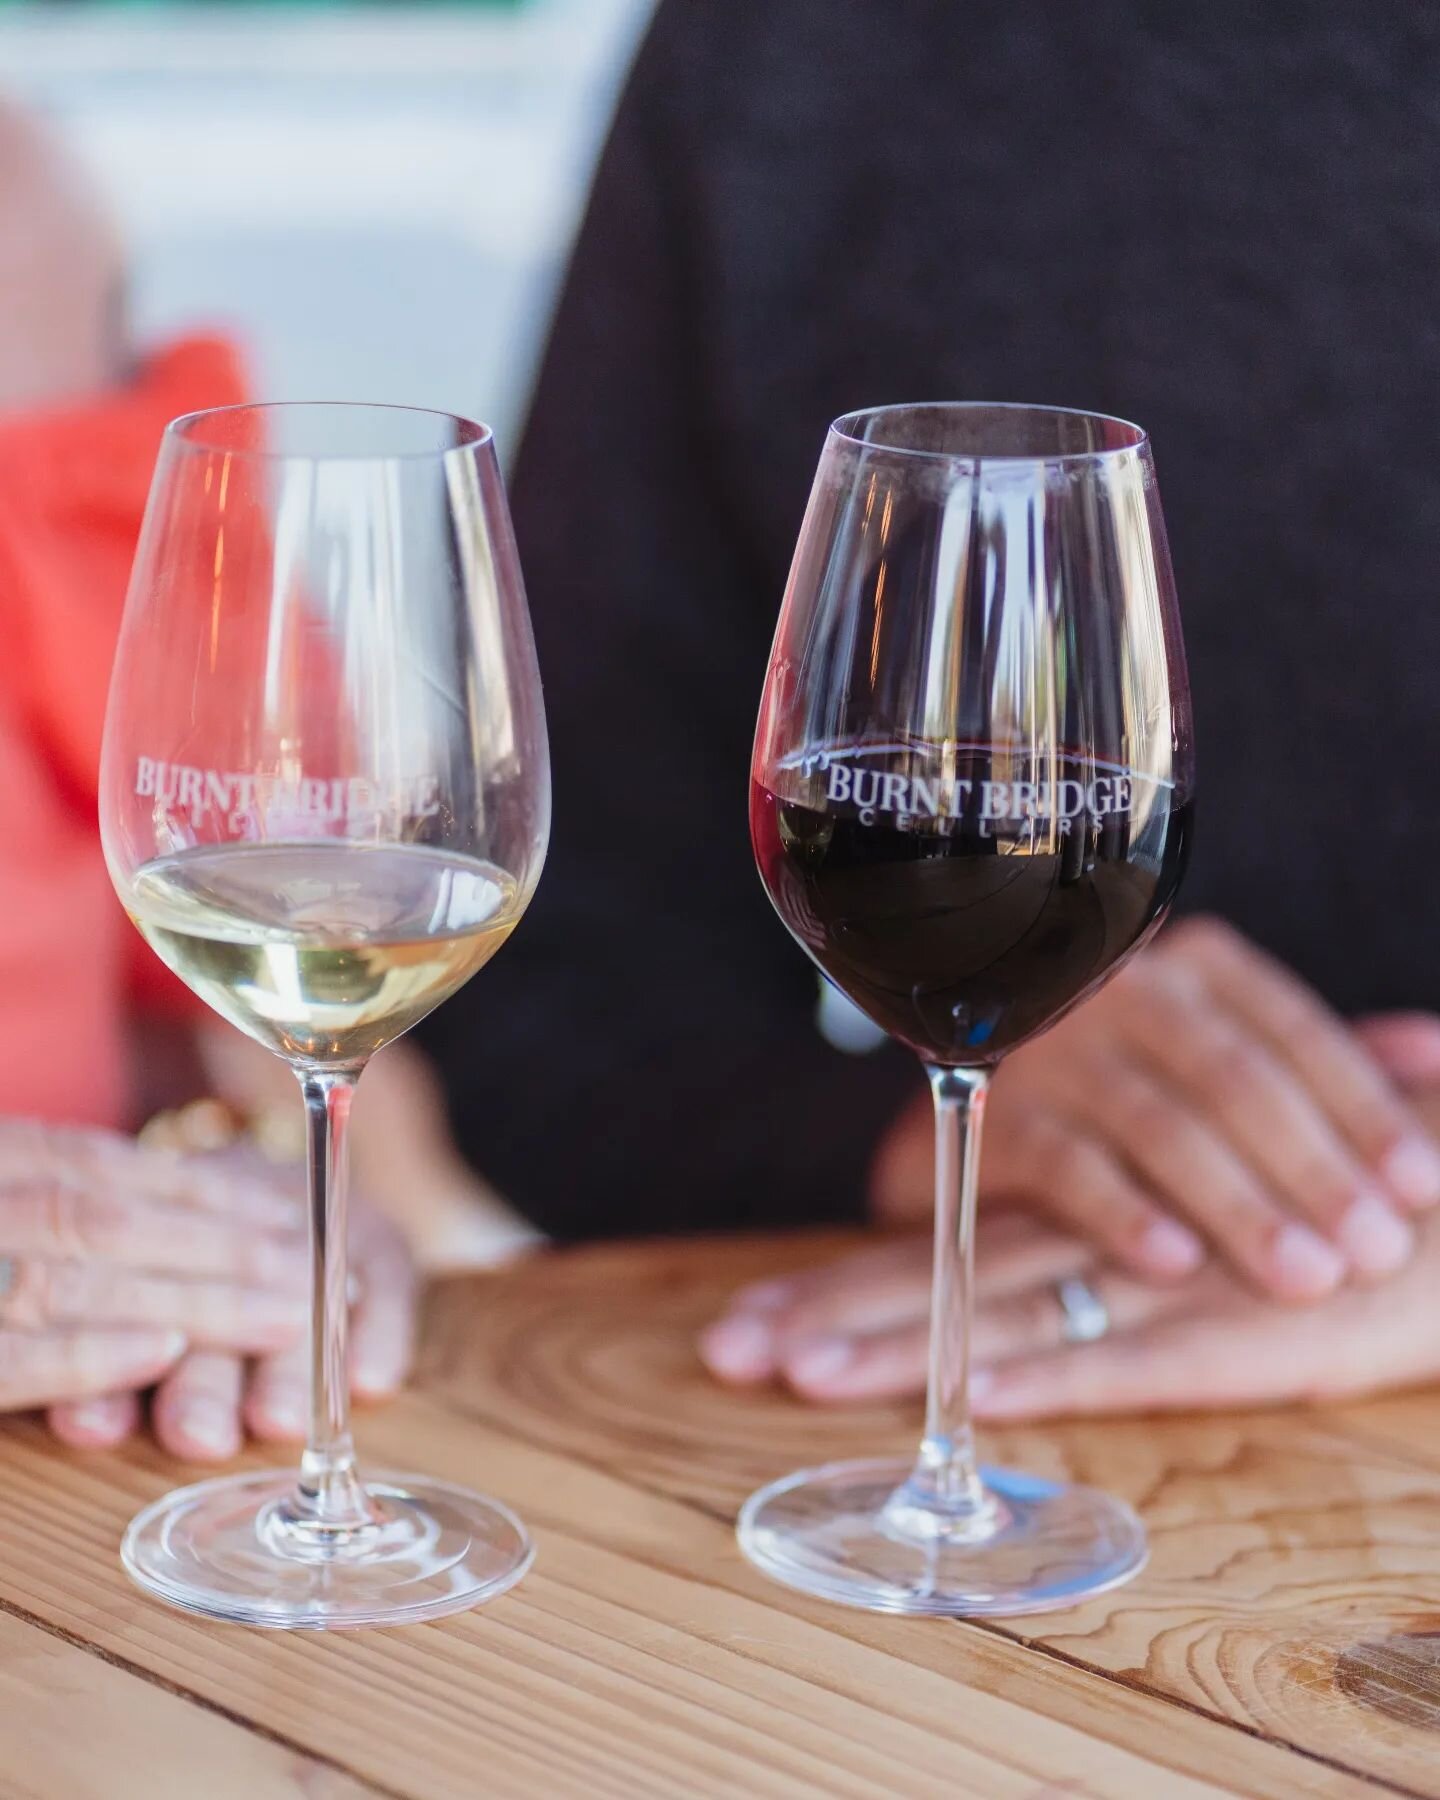 Join us for a glass or two tonight at the winery! We have 5 wines on our rotating flight or you can choose one of our wines on tap for a glass pour! Our favorite is the new Red Mountain Cabernet Sauvignon 🤩